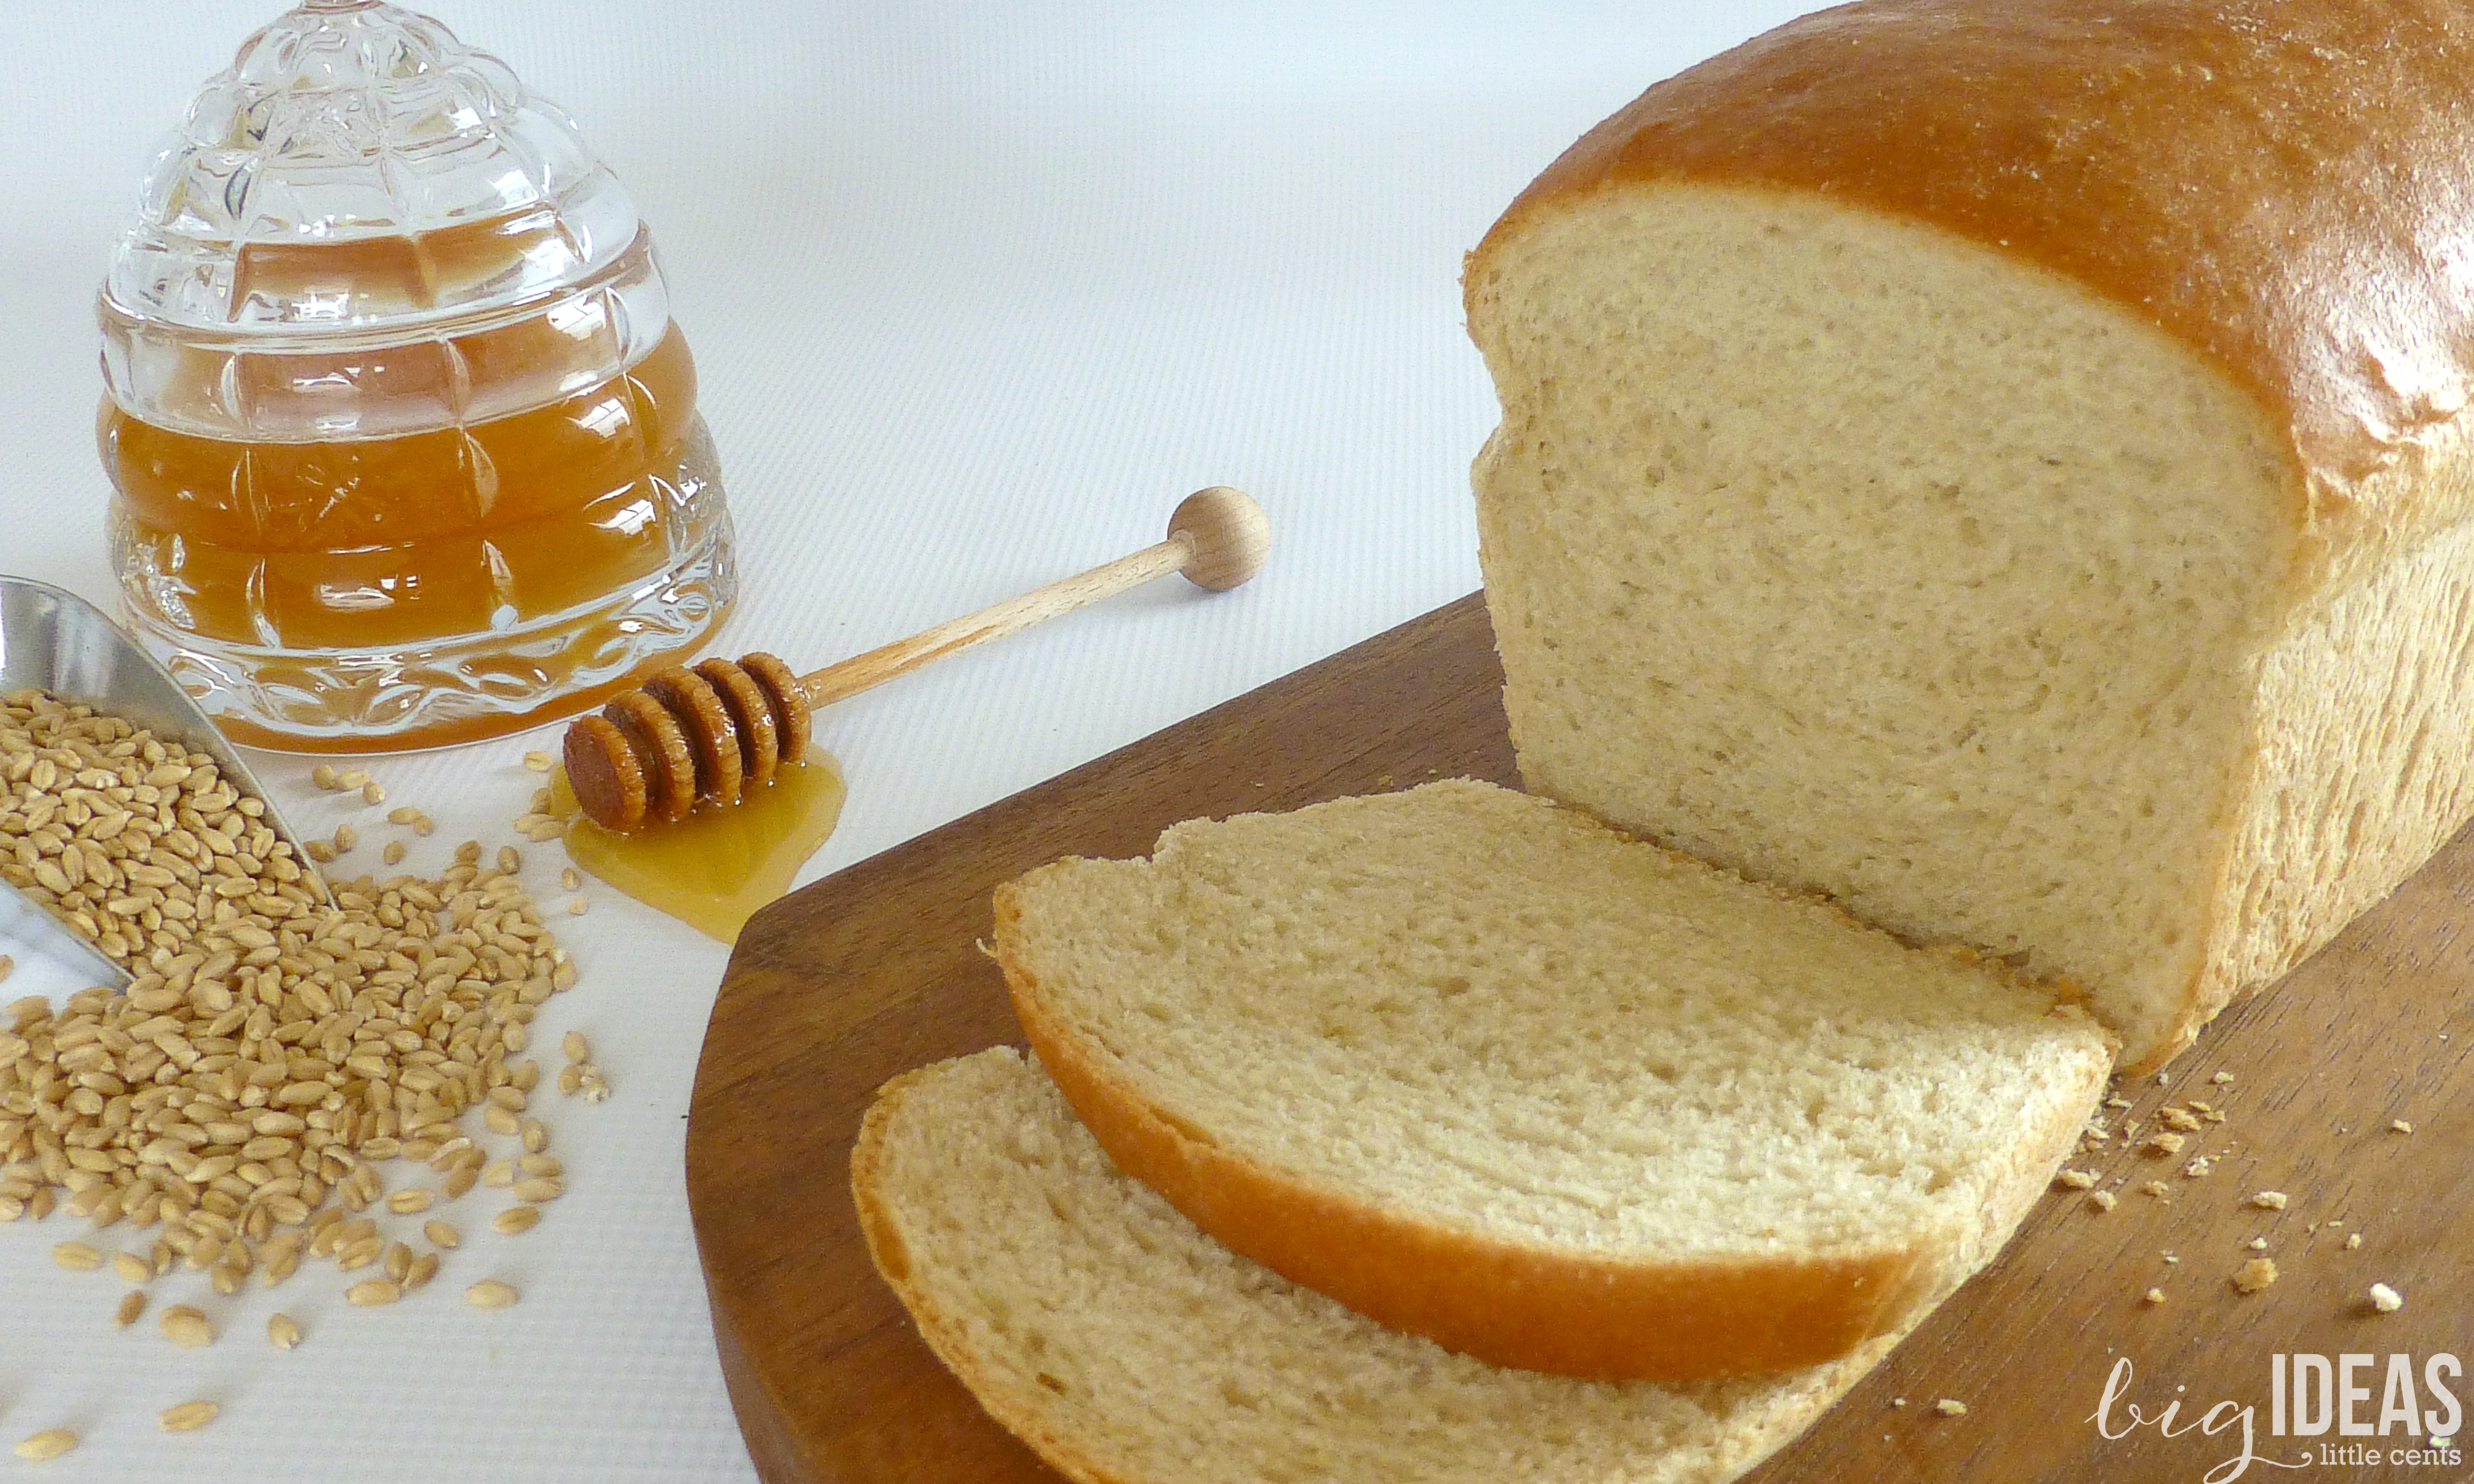 Homemade Whole Wheat and Honey Bread - Big Ideas Little Cents